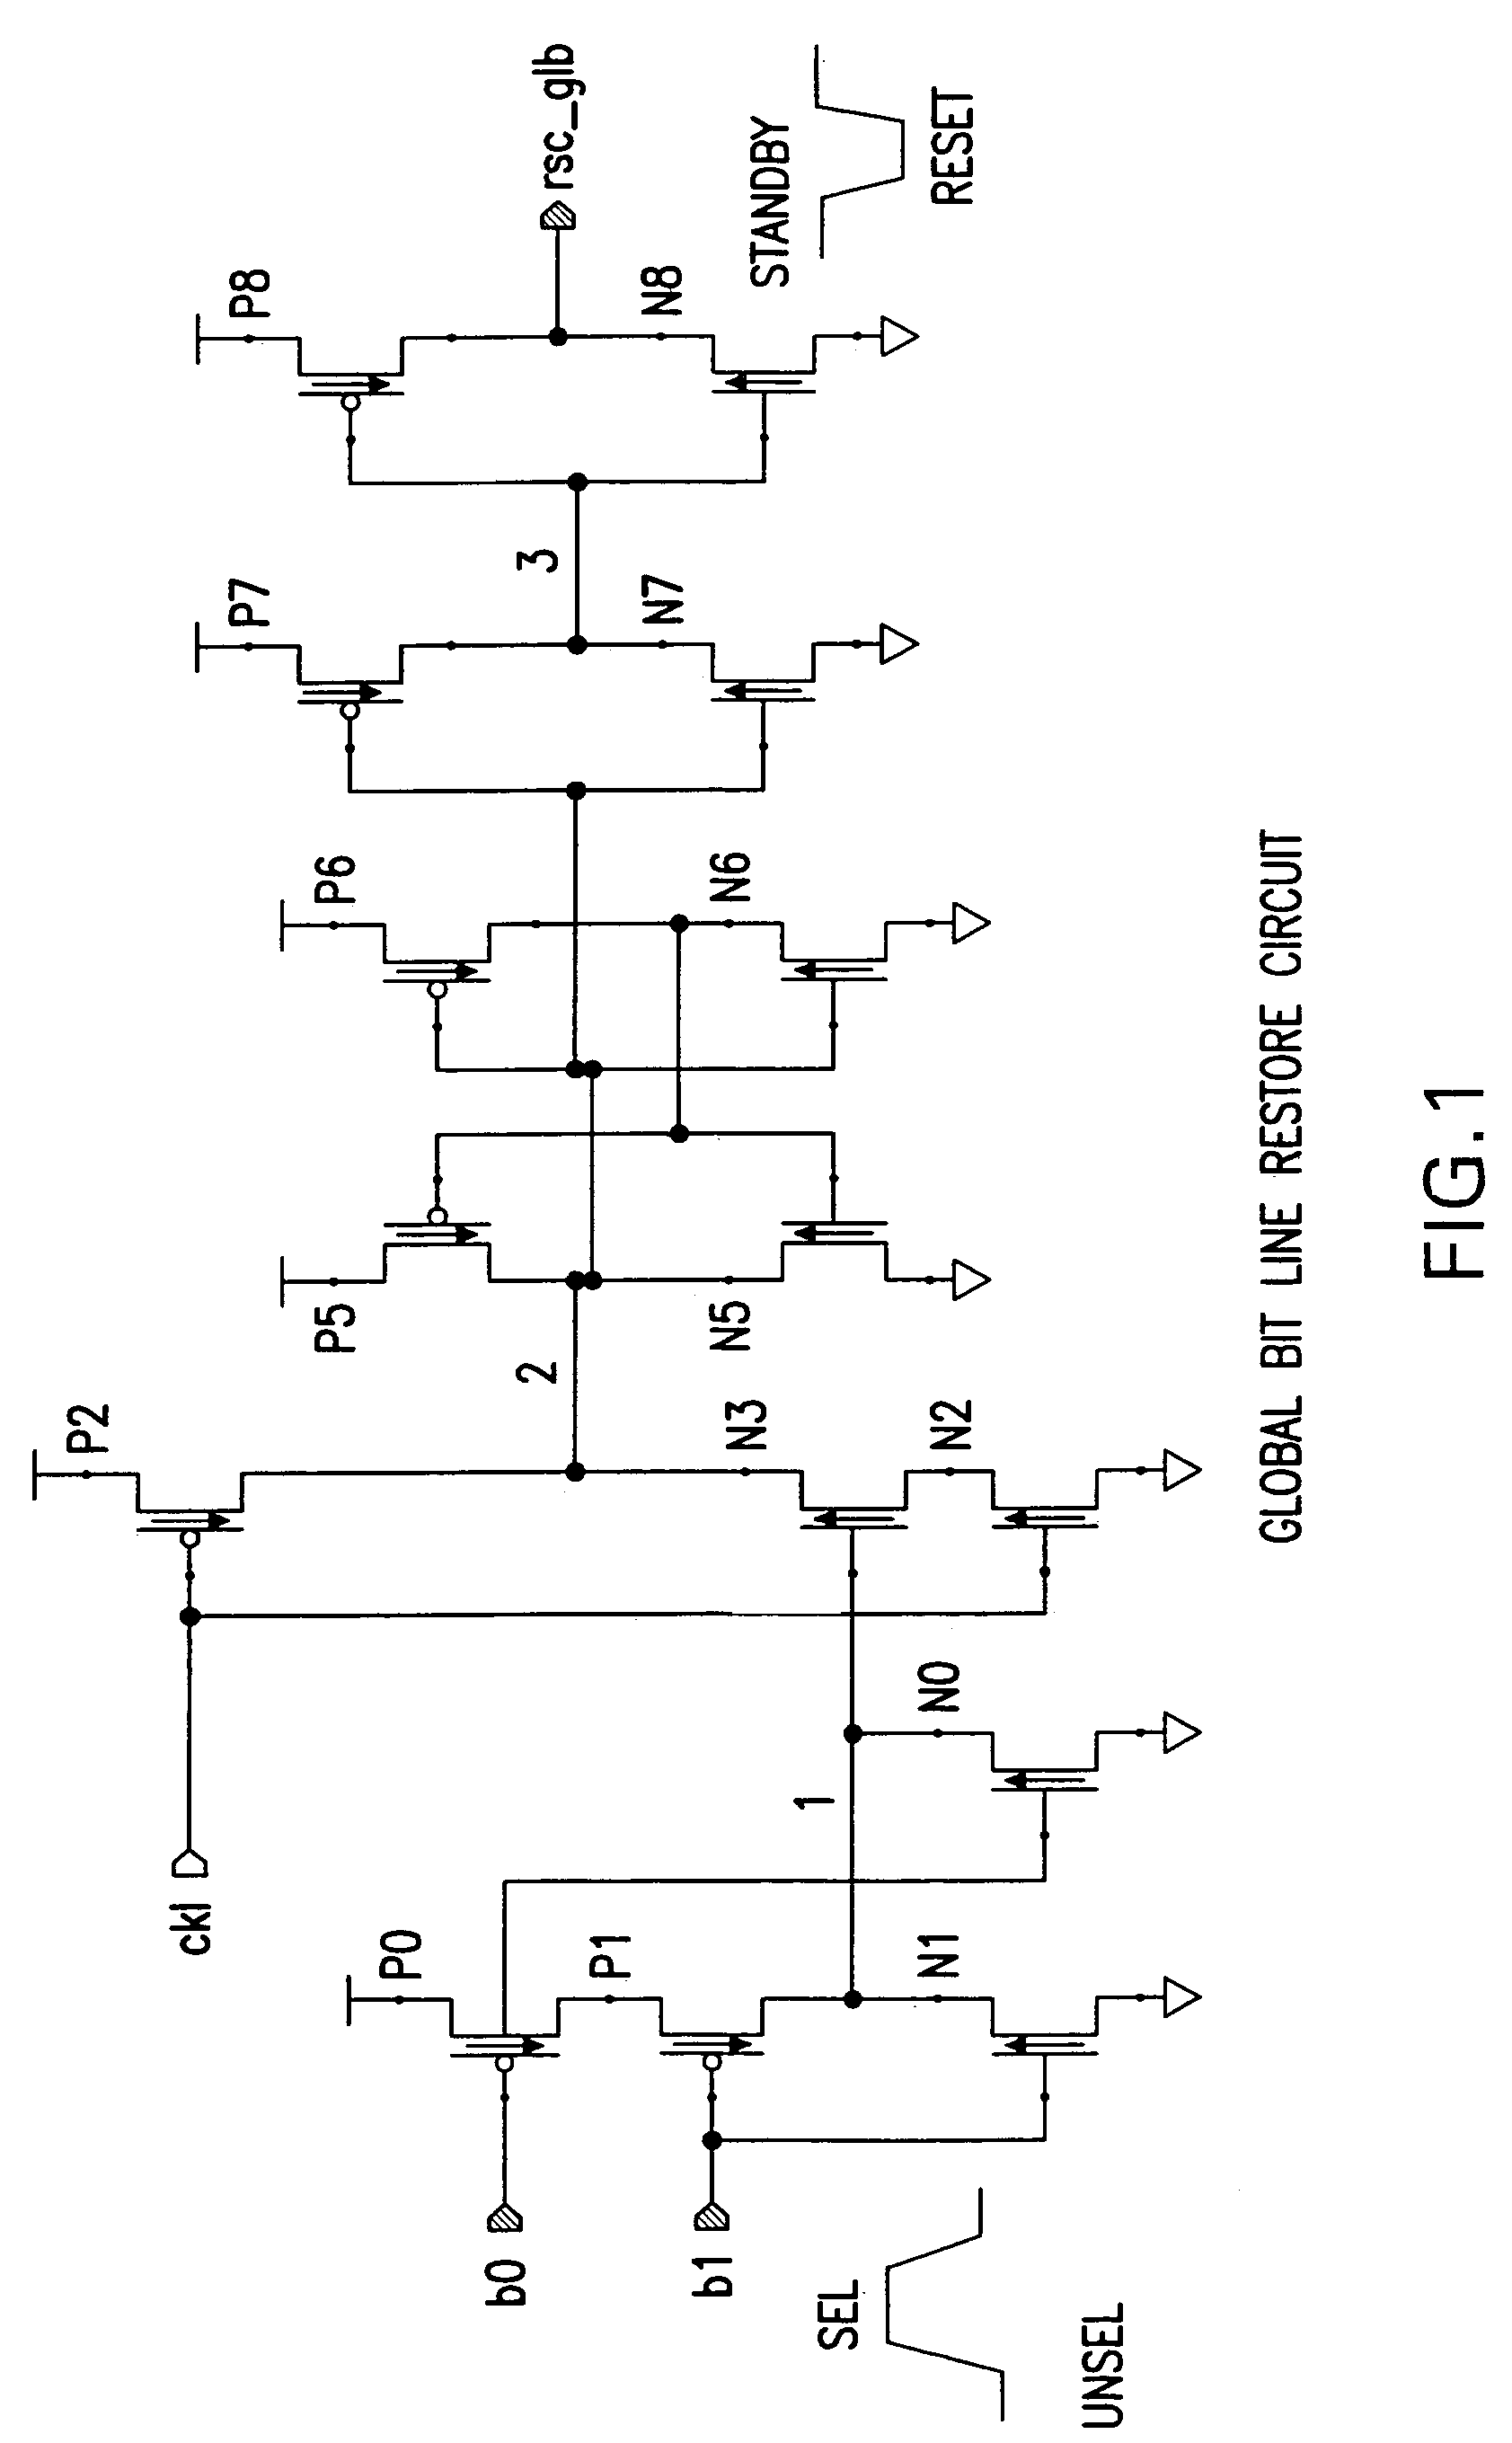 Global bit line restore timing scheme and circuit